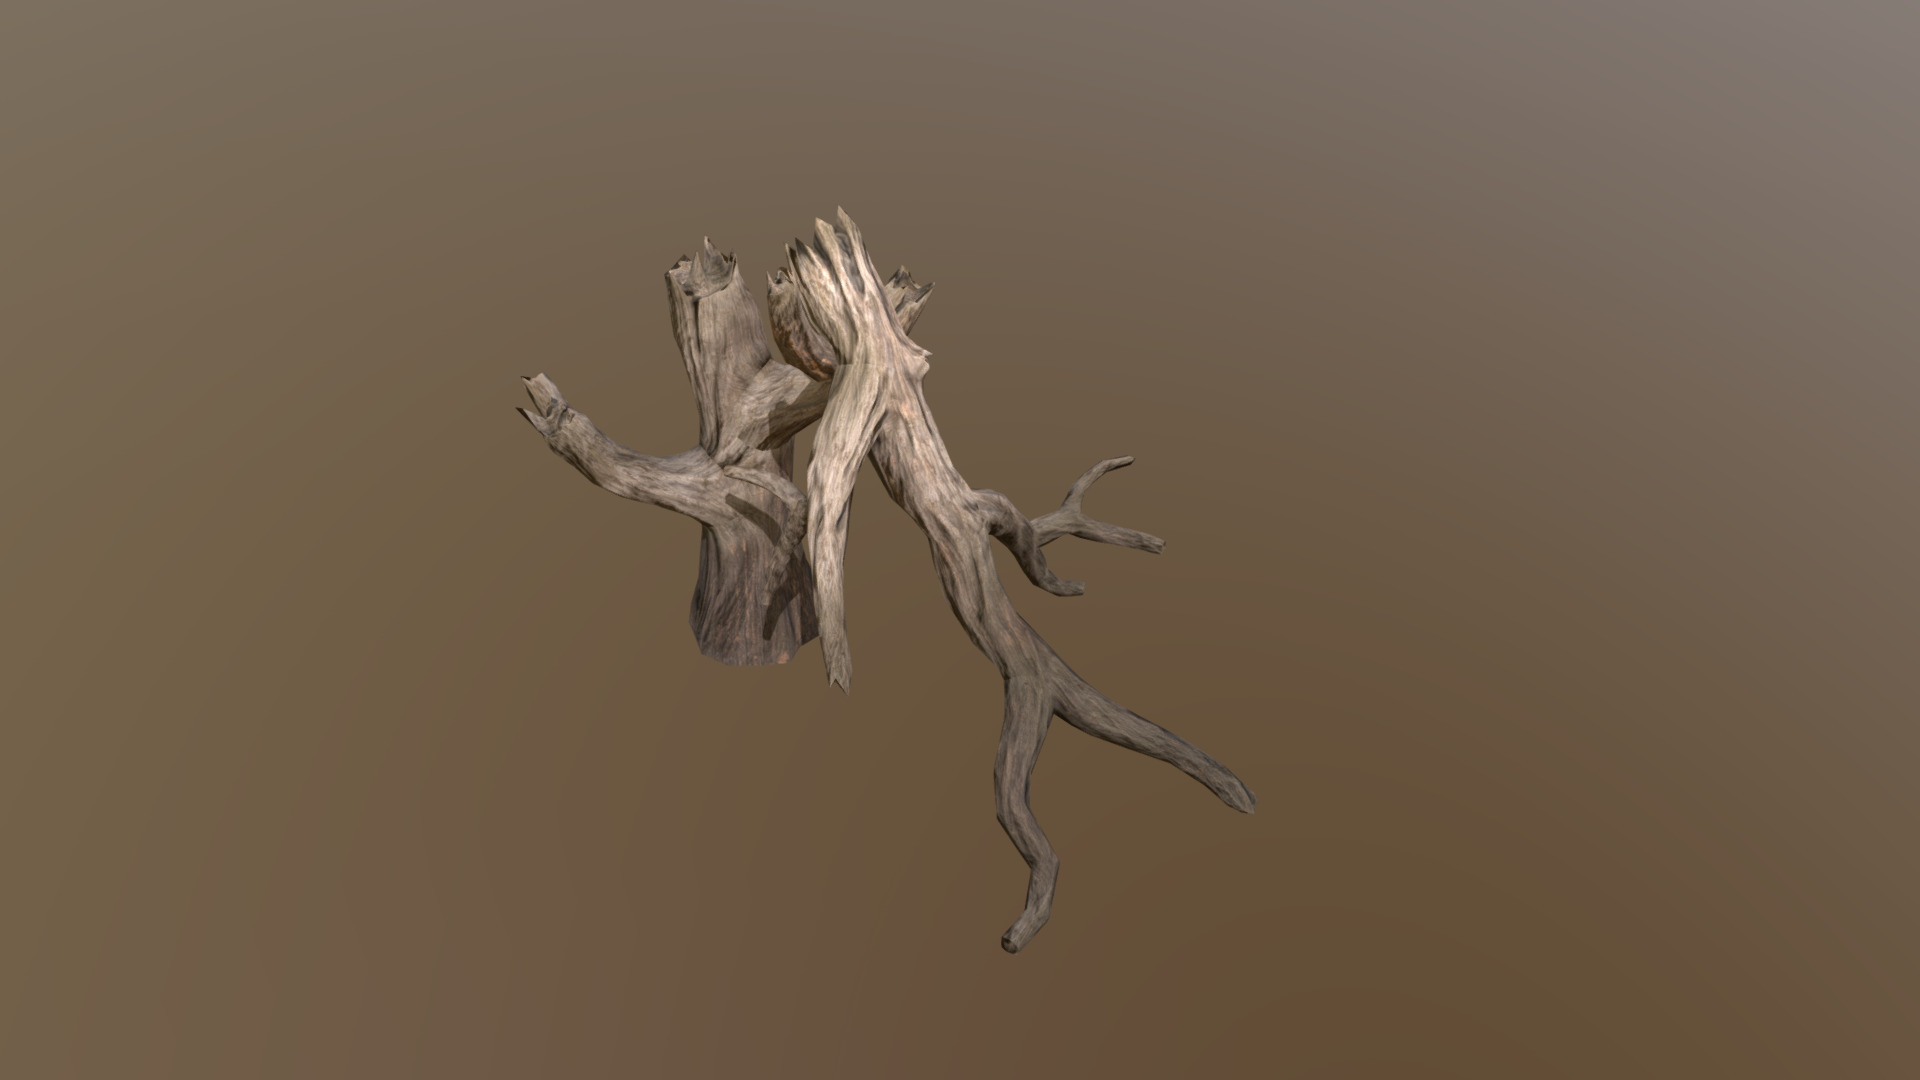 3D model Low Poly Dead Trees 03 - This is a 3D model of the Low Poly Dead Trees 03. The 3D model is about a tree branch with a skeleton.